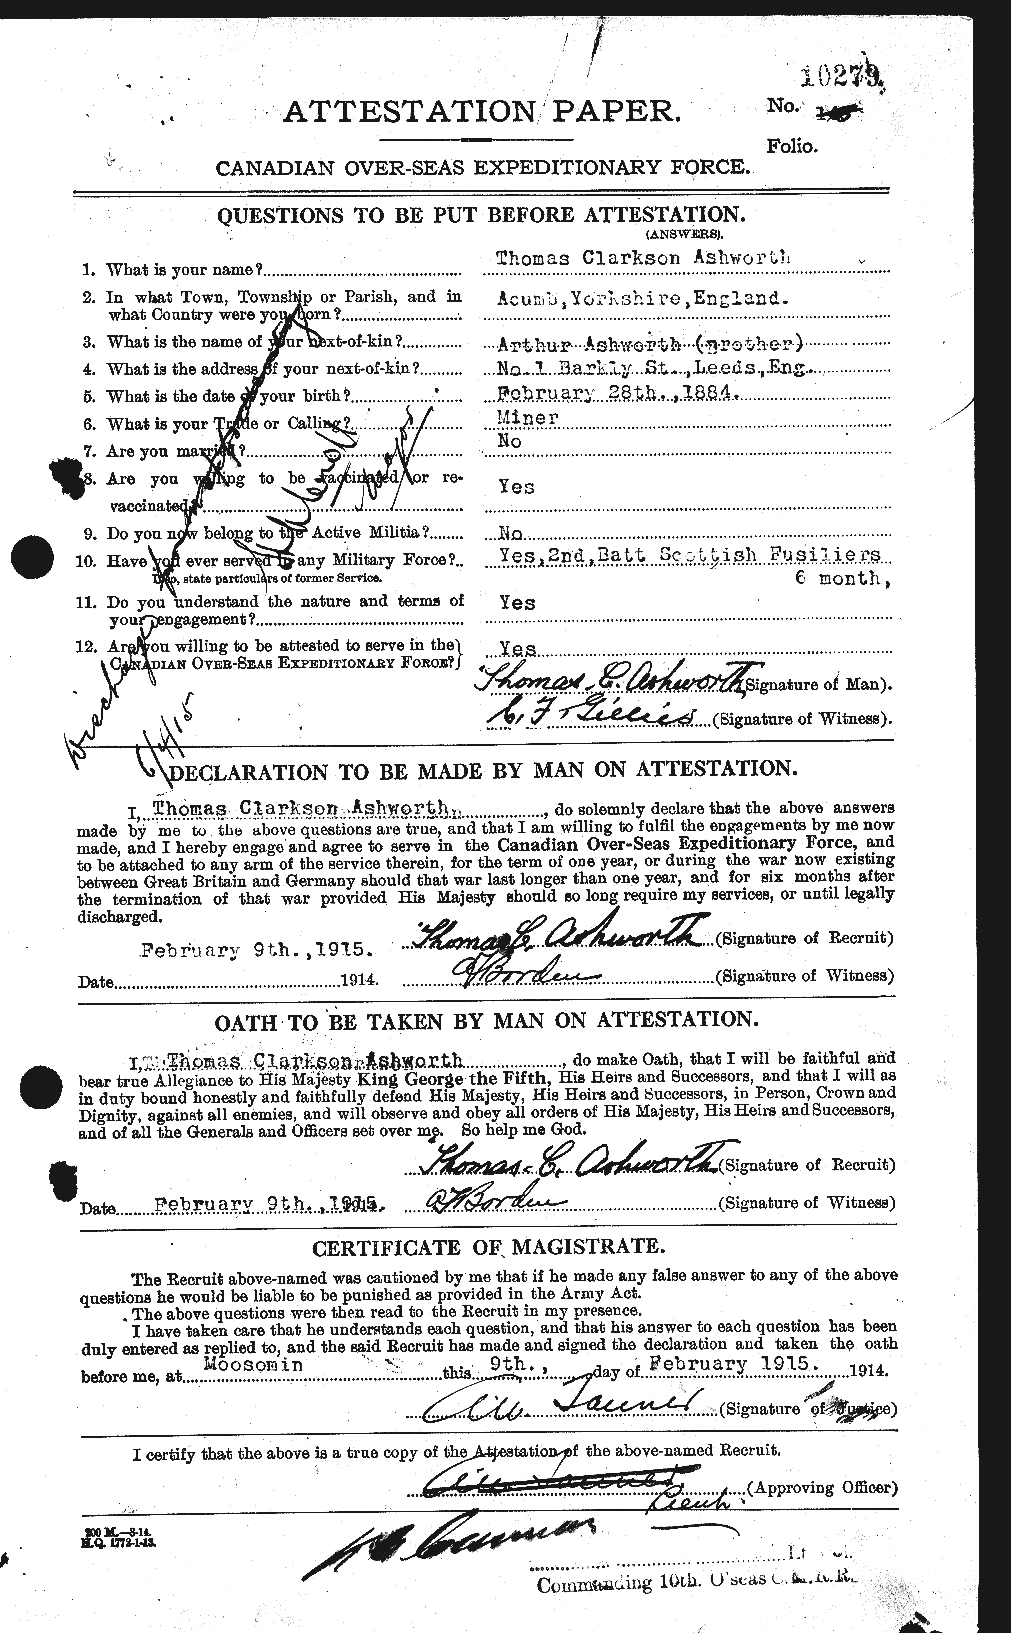 Personnel Records of the First World War - CEF 223706a